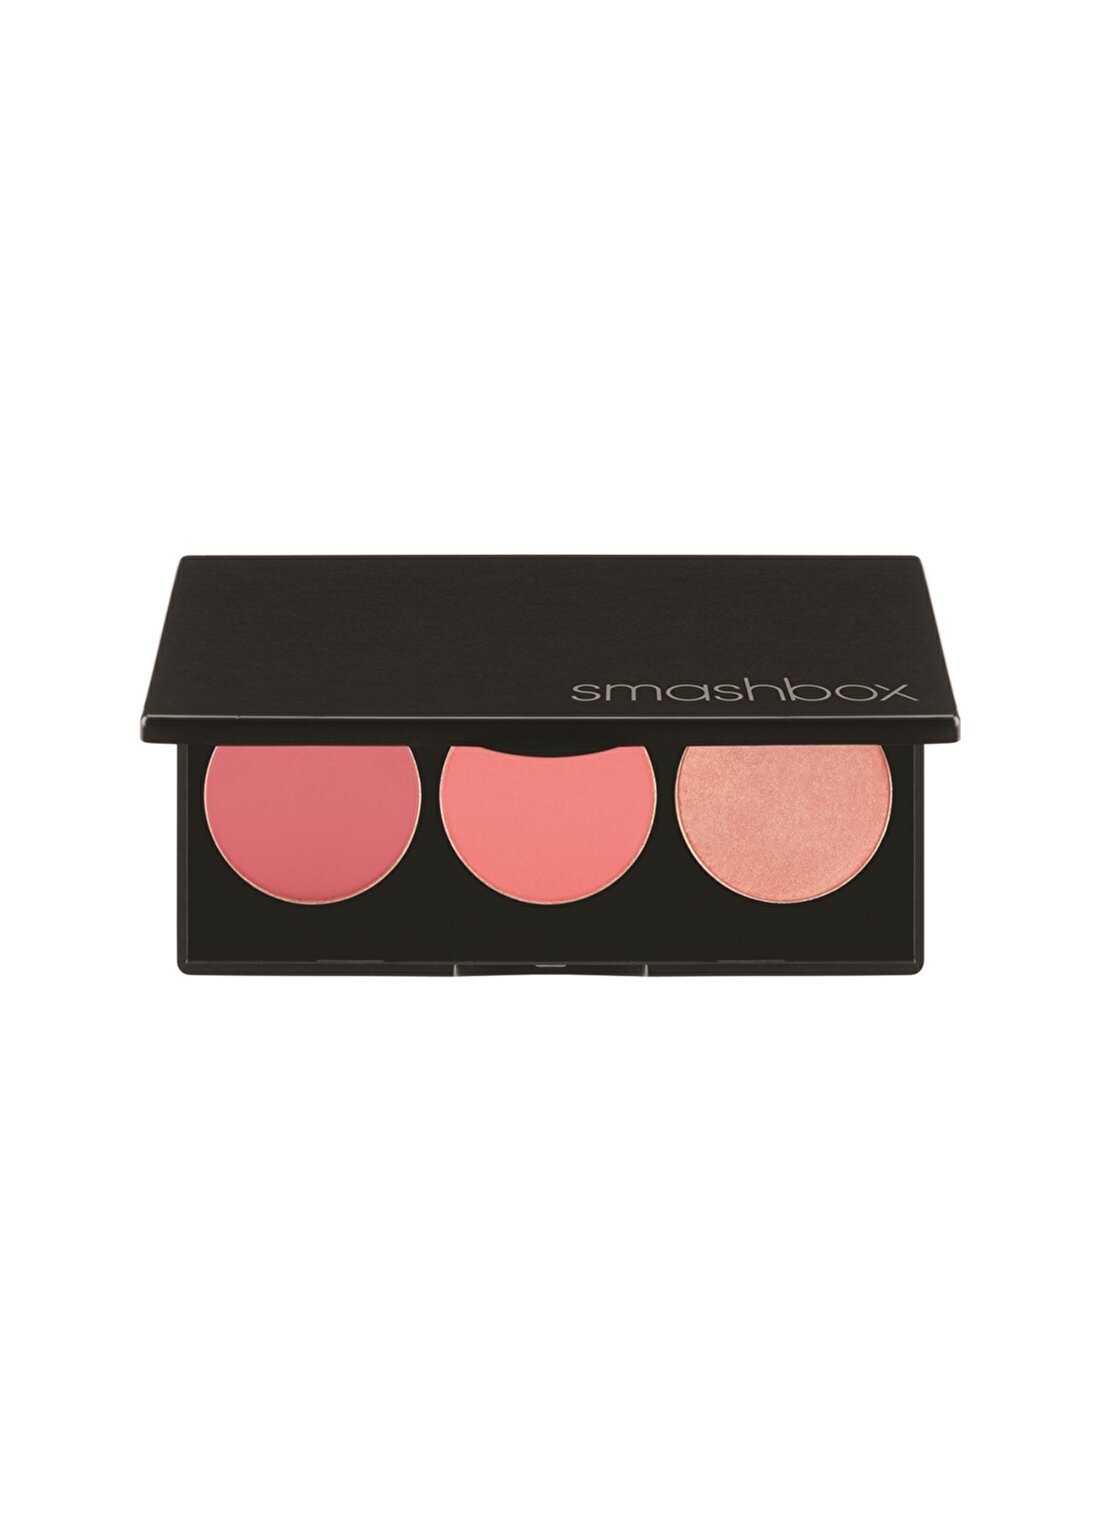 Smashbox L.A. Lights Blush And Highlight Palette - Pacific Coast Pink